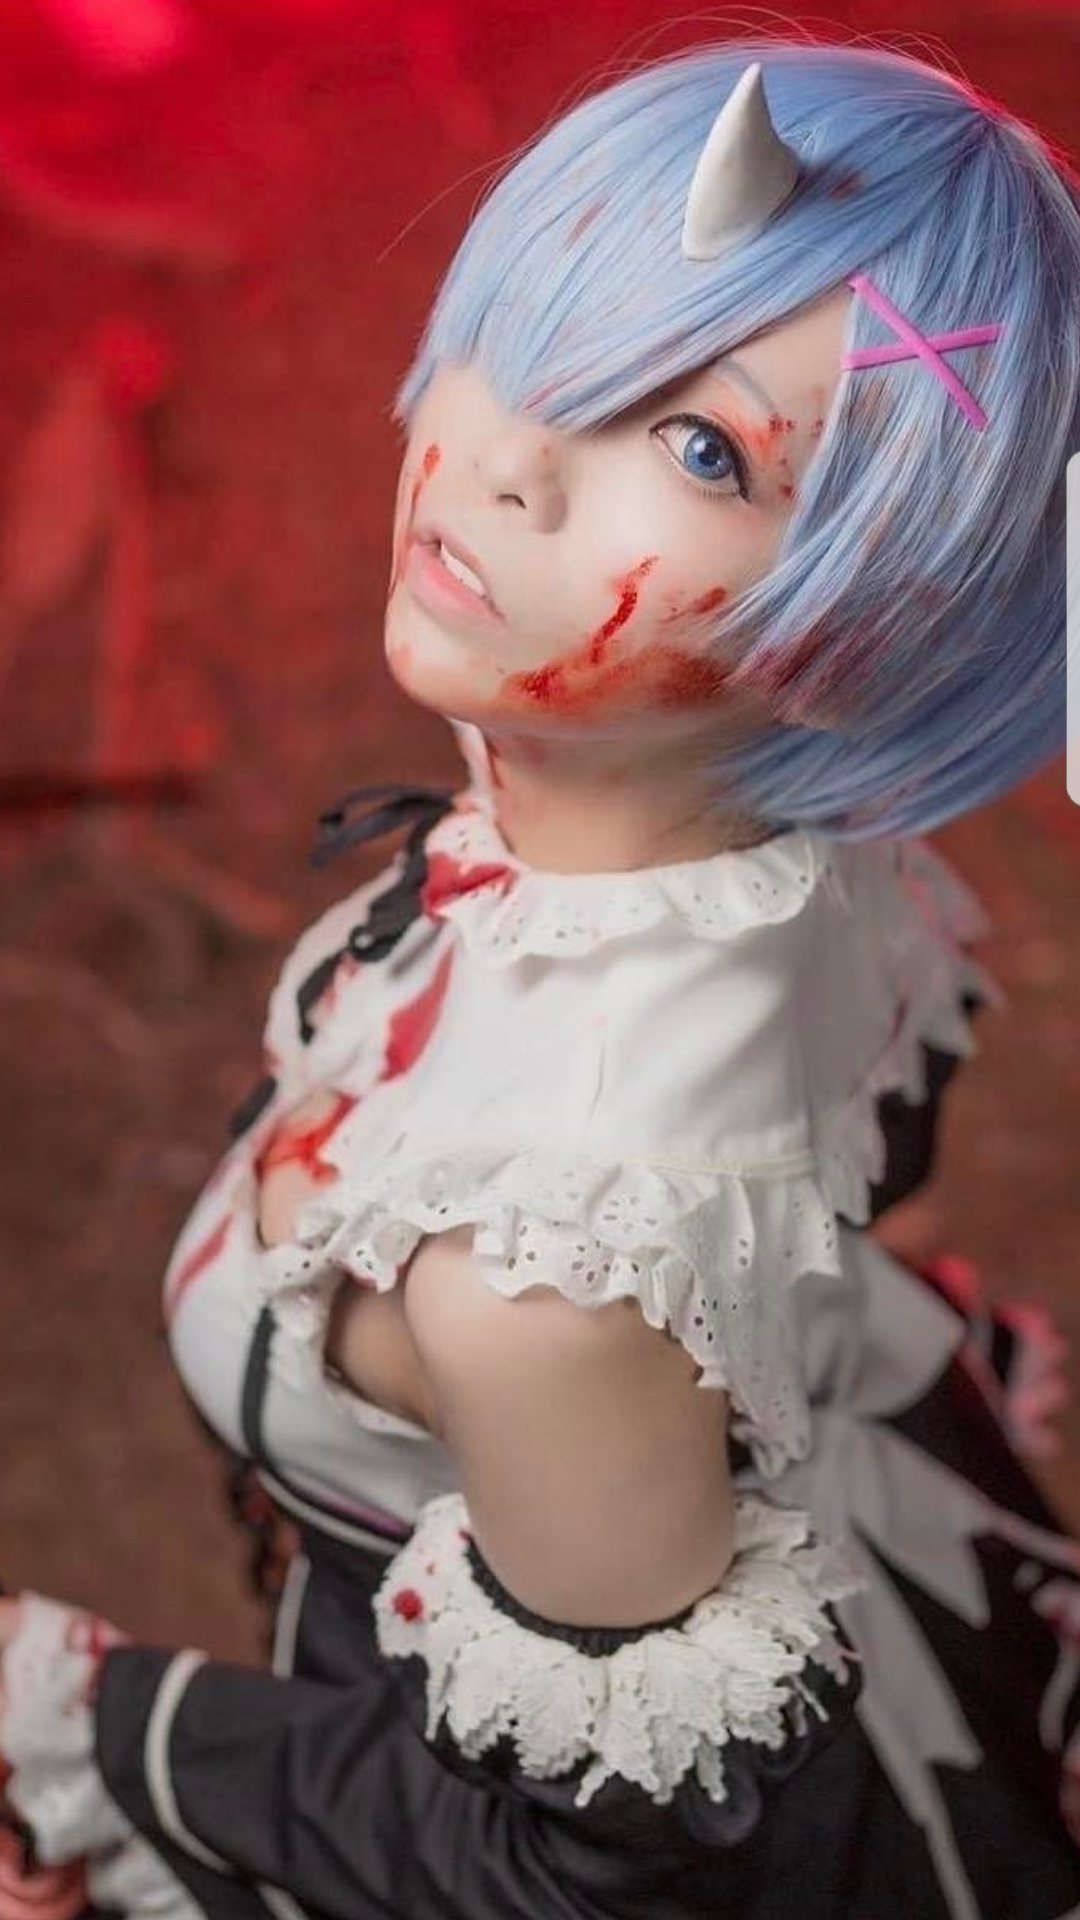 Watch the Photo by Sunsura with the username @Sunsura, posted on March 22, 2017 and the text says '#cosplay  #re:zero  #cute'